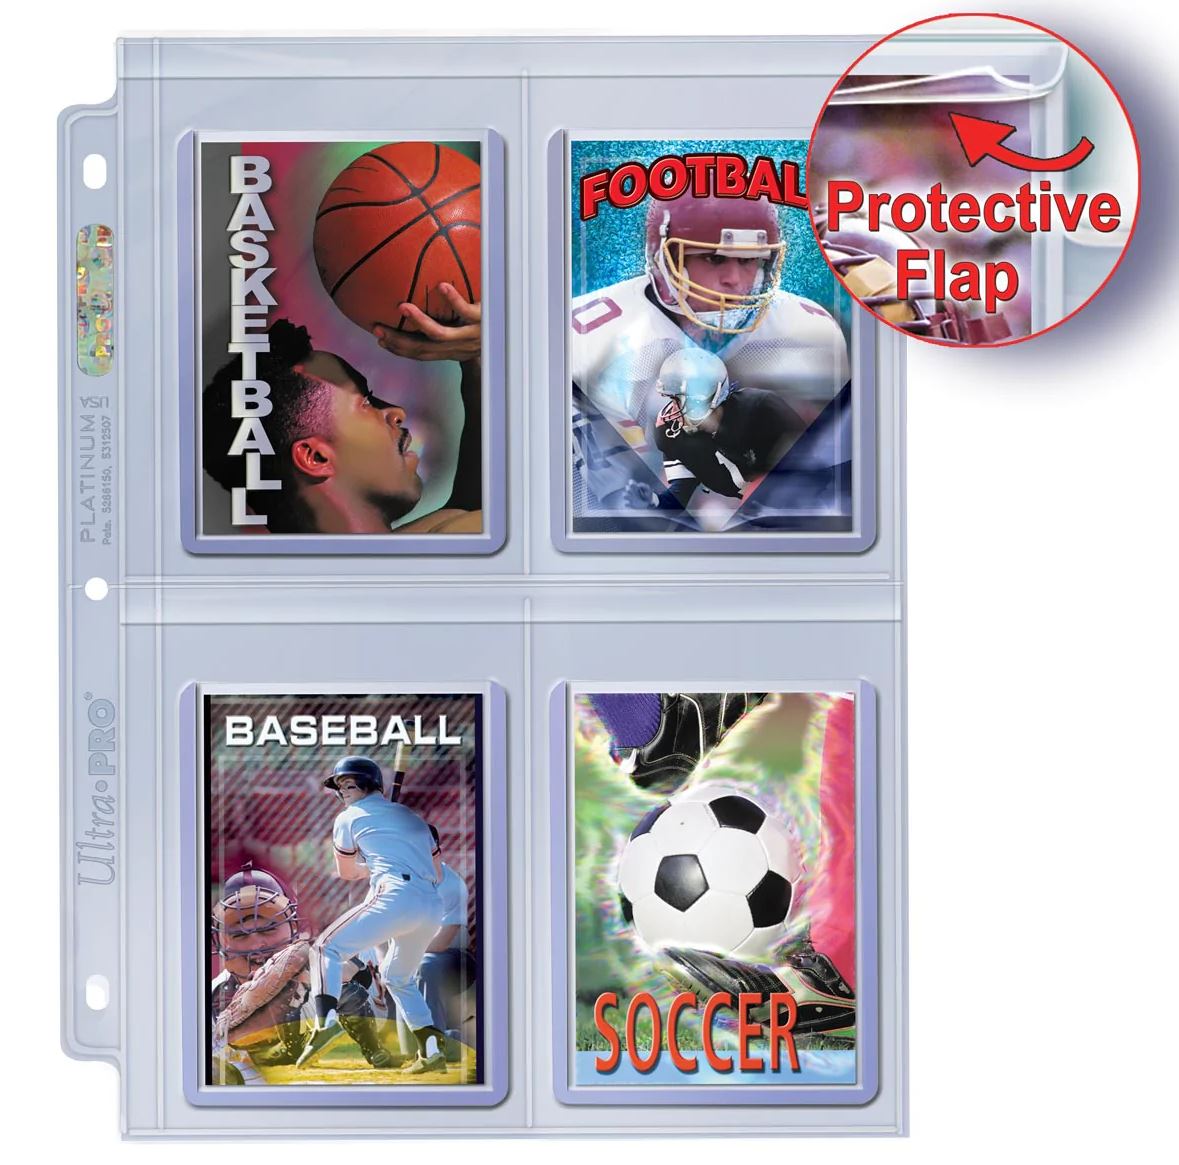 Ultra Pro - Premium Clear 100ct. Card Sleeves to Protect Sports Cards,  Baseball / Football Cards, and Collectible Cards, Standard Size